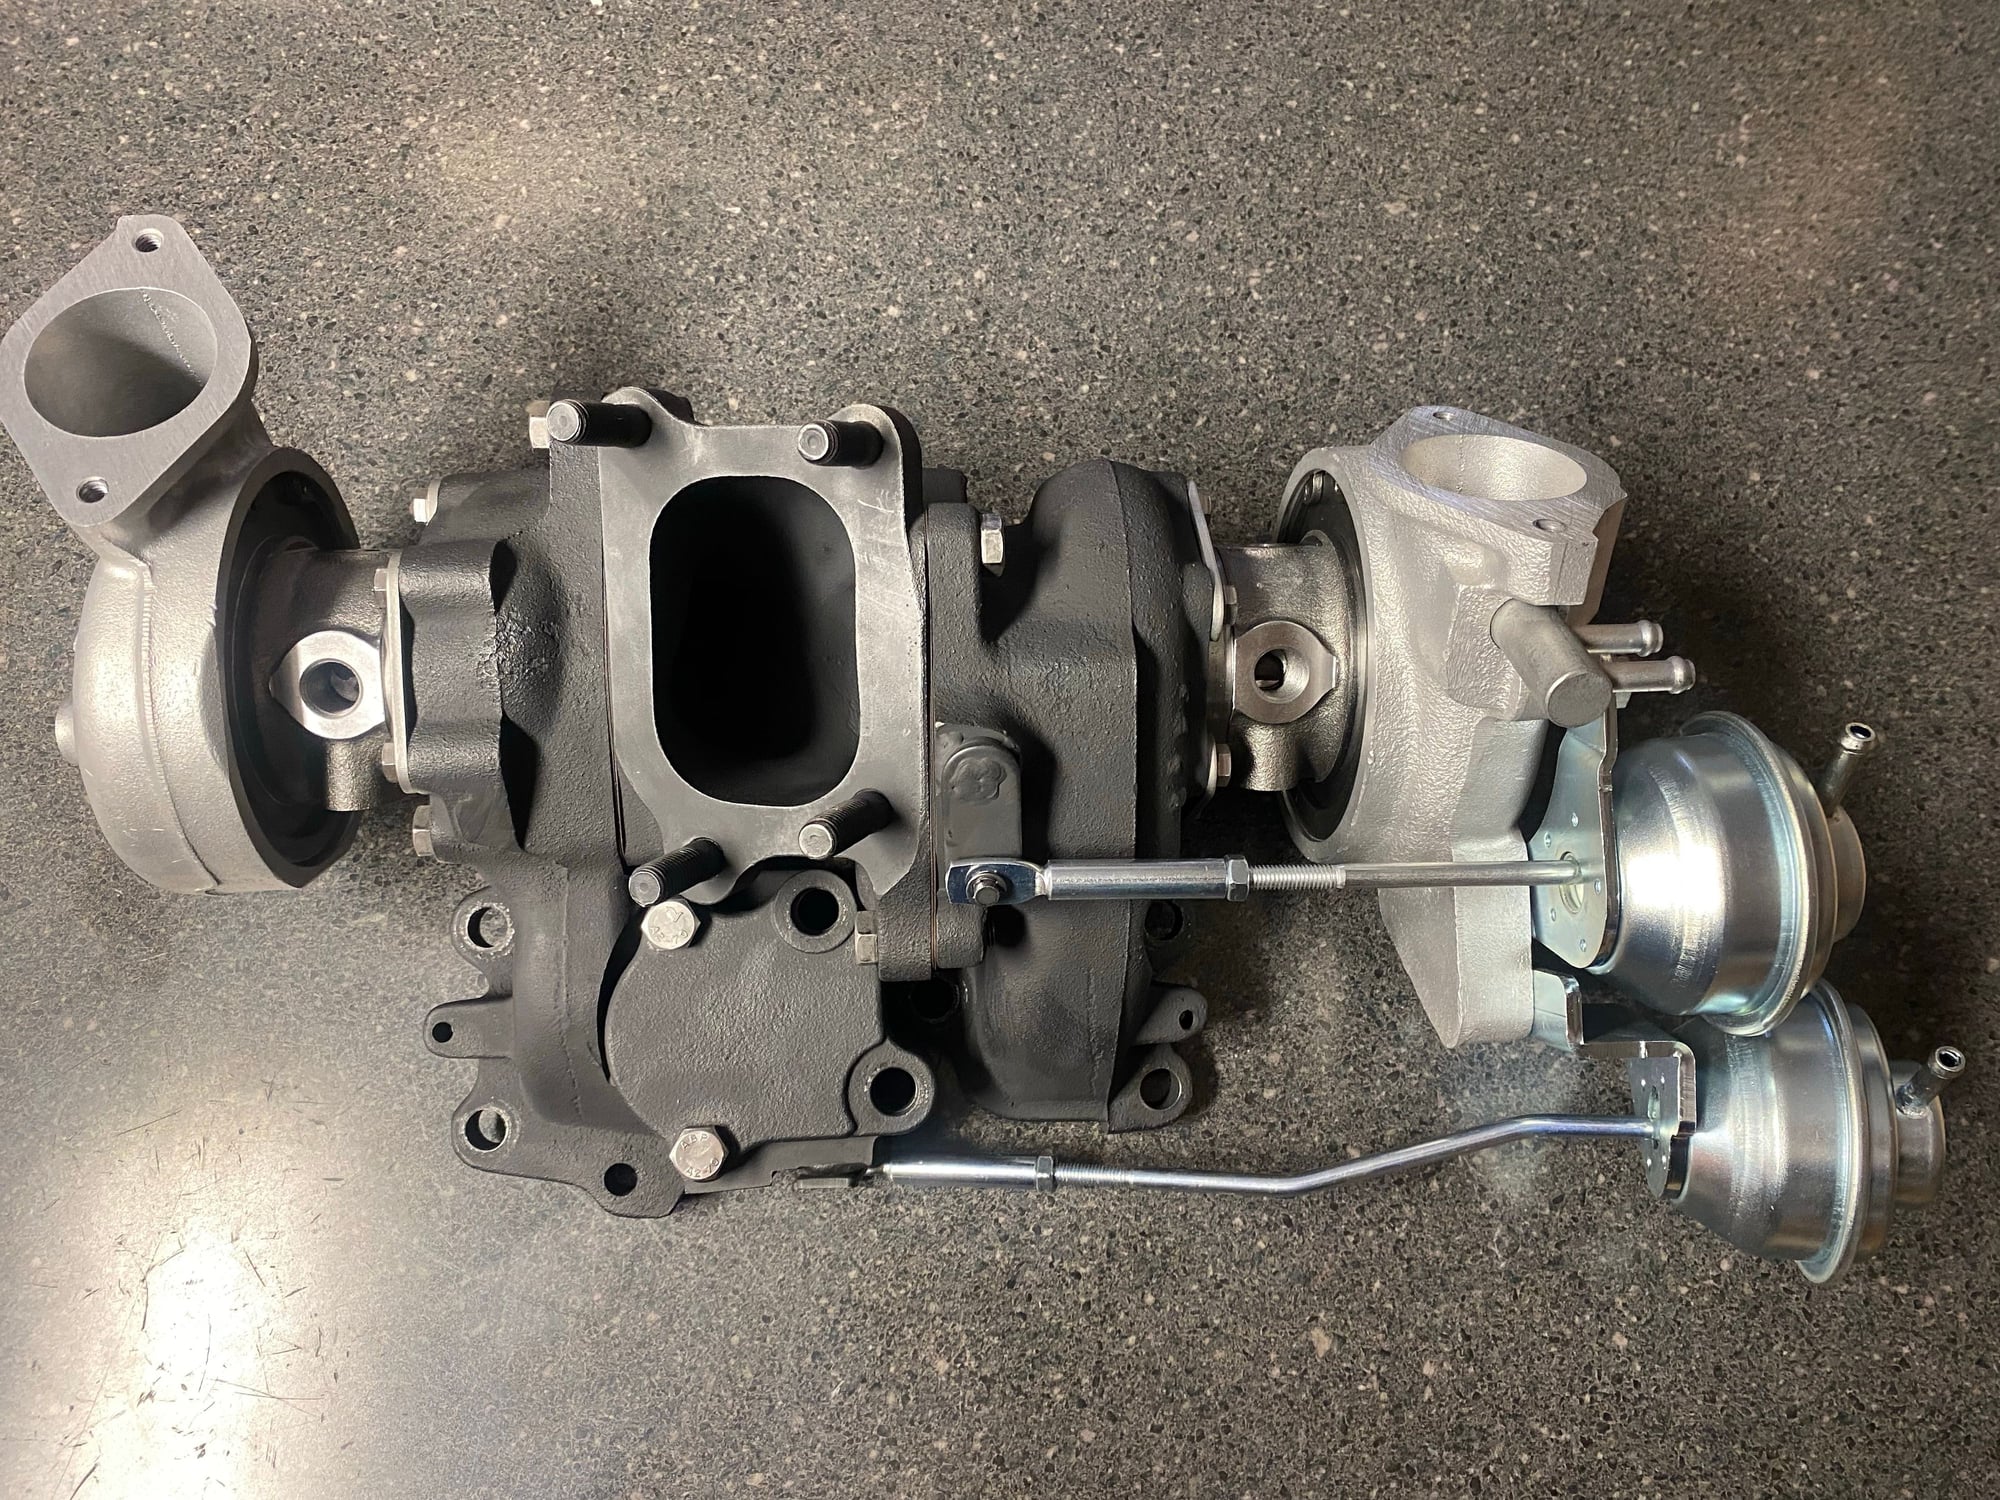 Engine - Intake/Fuel - WTB BNR Stage 3 twin turbos - New or Used - 1993 to 2002 Mazda RX-7 - Oslo, Norway